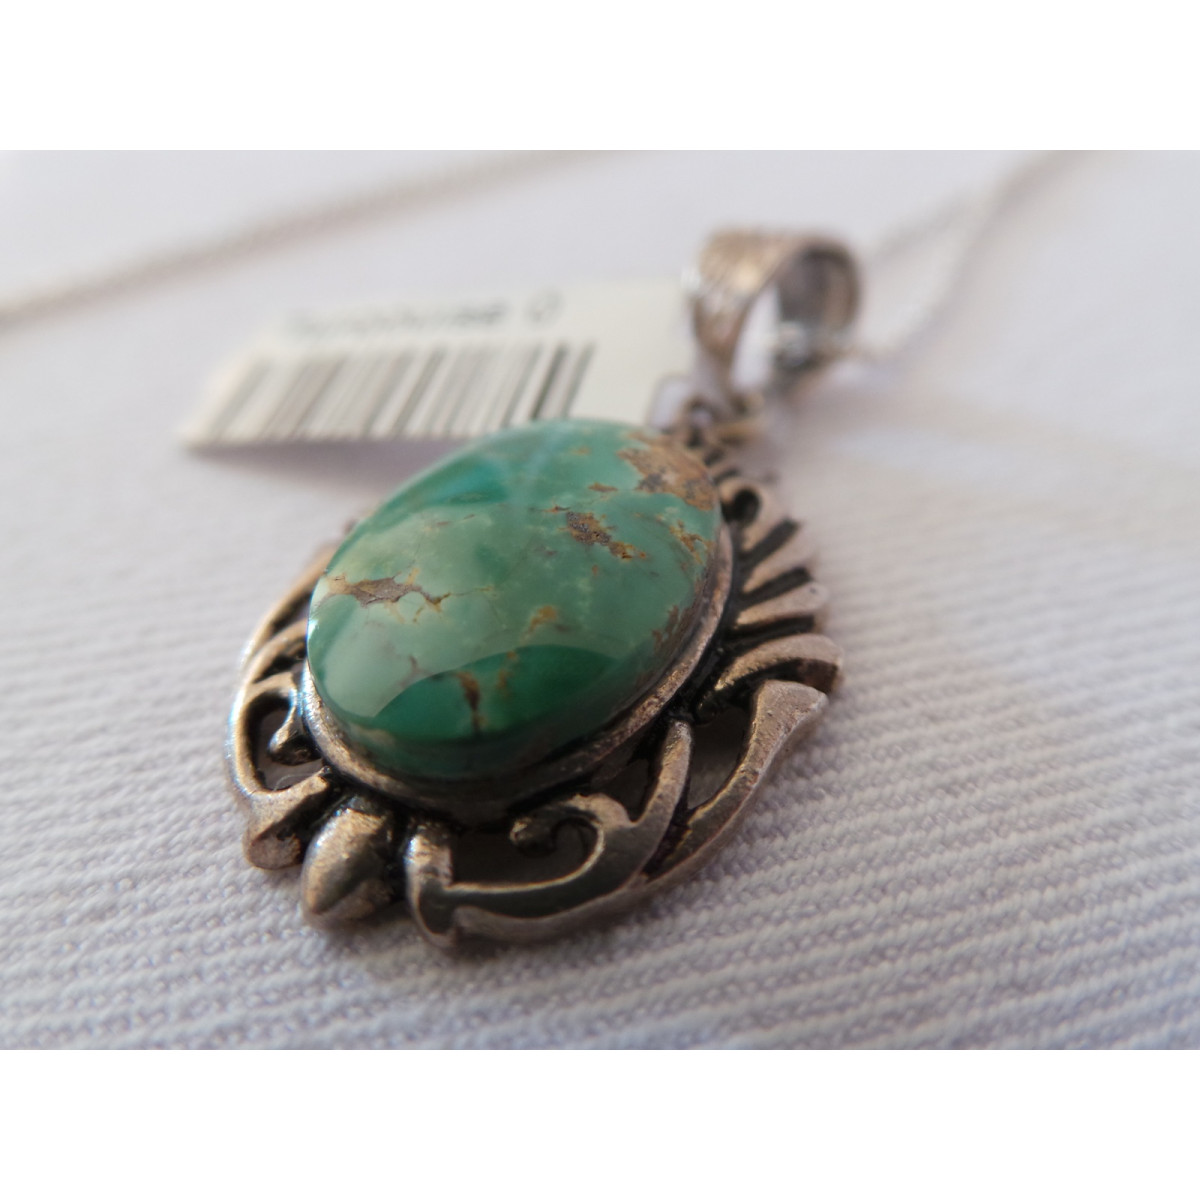 Turquoise Stone and Silver Pendant with Silver Necklace - HA2082-Persian Handicrafts